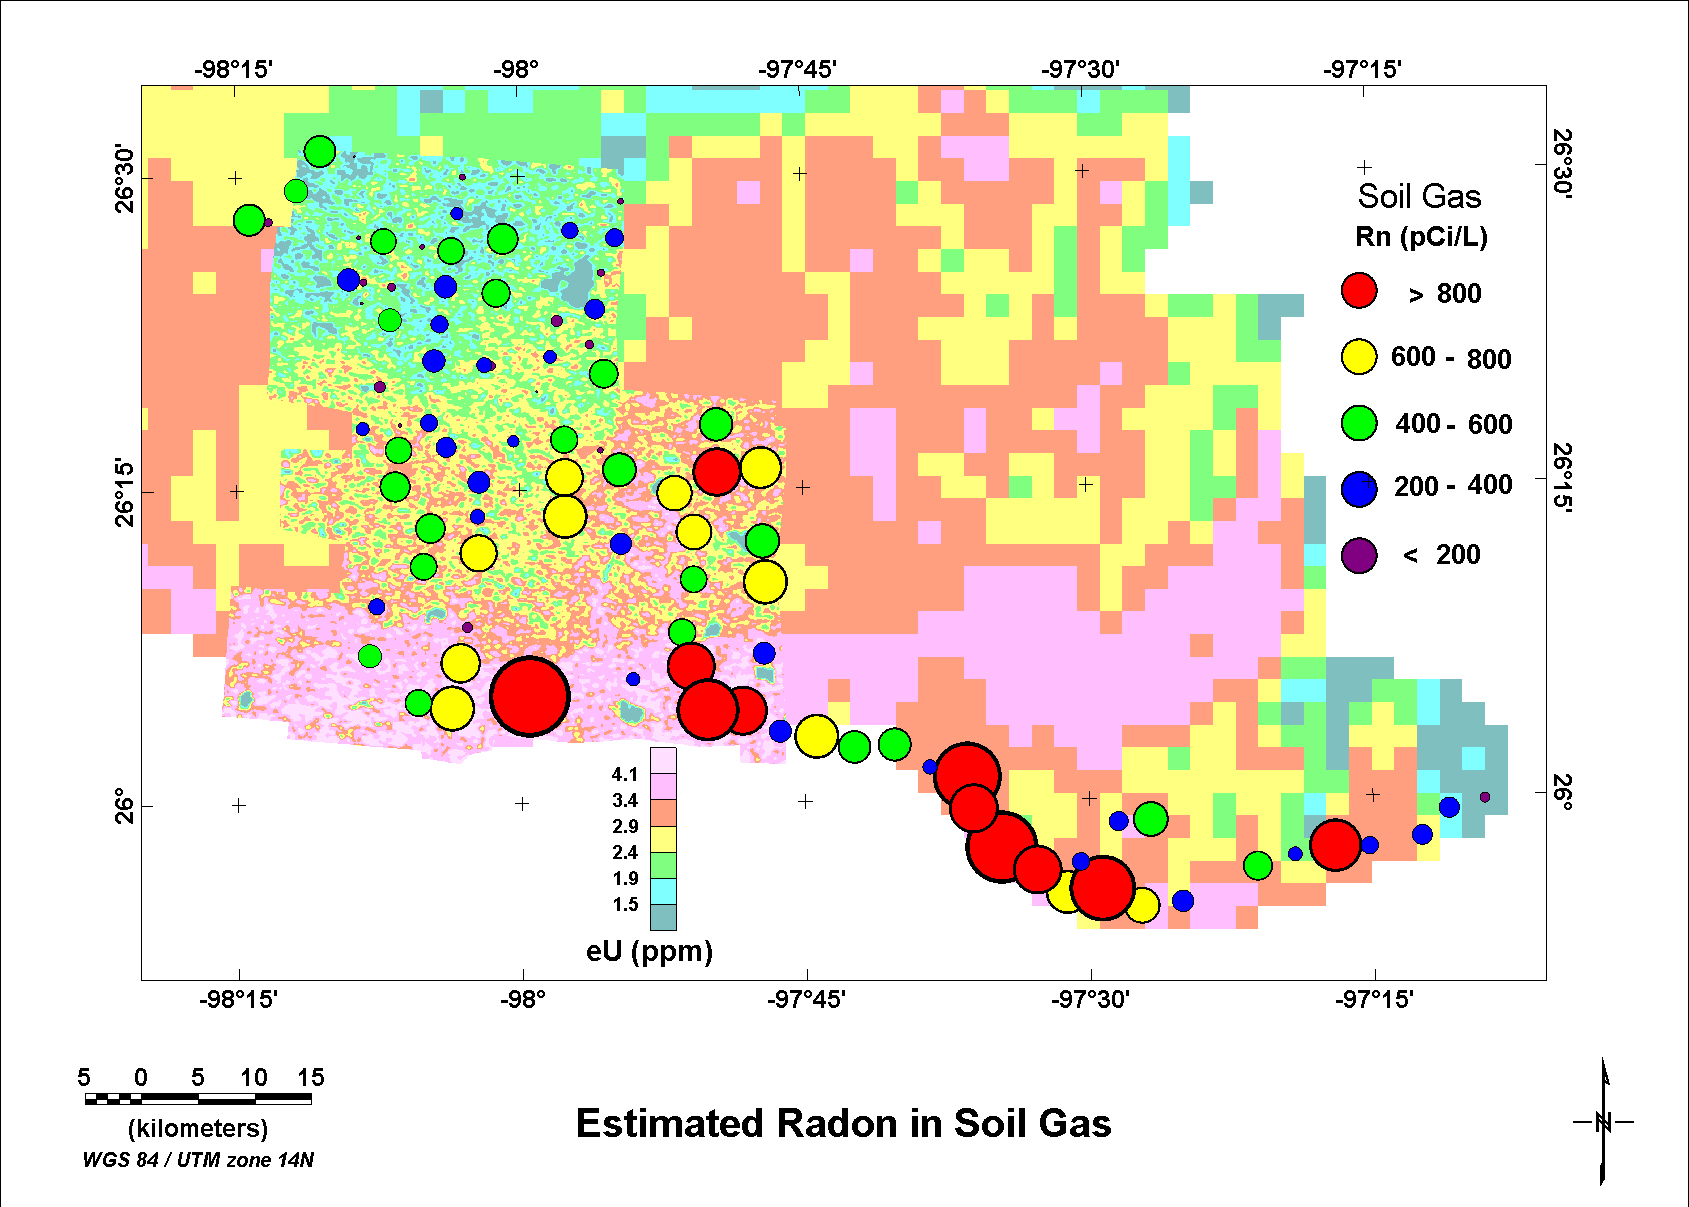 Images showing sample locations and soil gas radon estimates